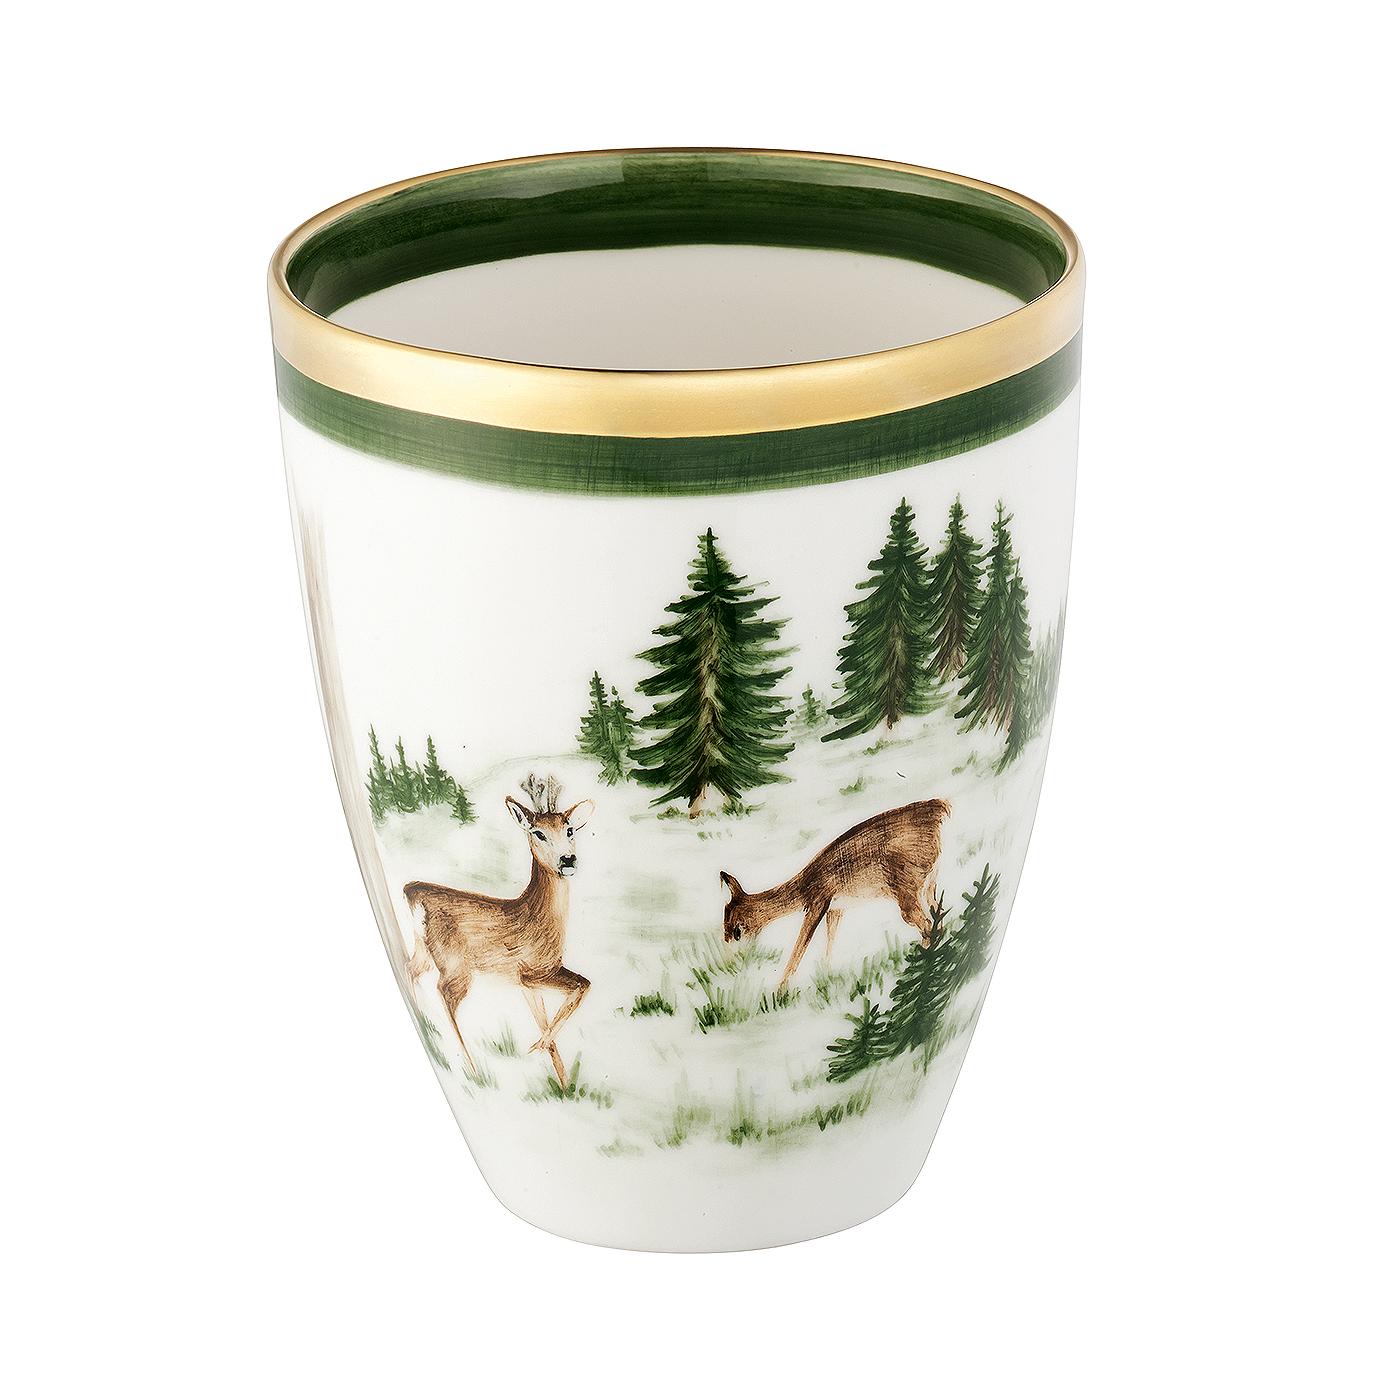 Hands-free painted porcelain vase with a hunting design with deers and trees all around. Lined with a green line and rimmed with a 24 carat gold line. Completely hand painted in Bavaria/Germany.
About Sofina:
The manufacturing of Sofina porcelain